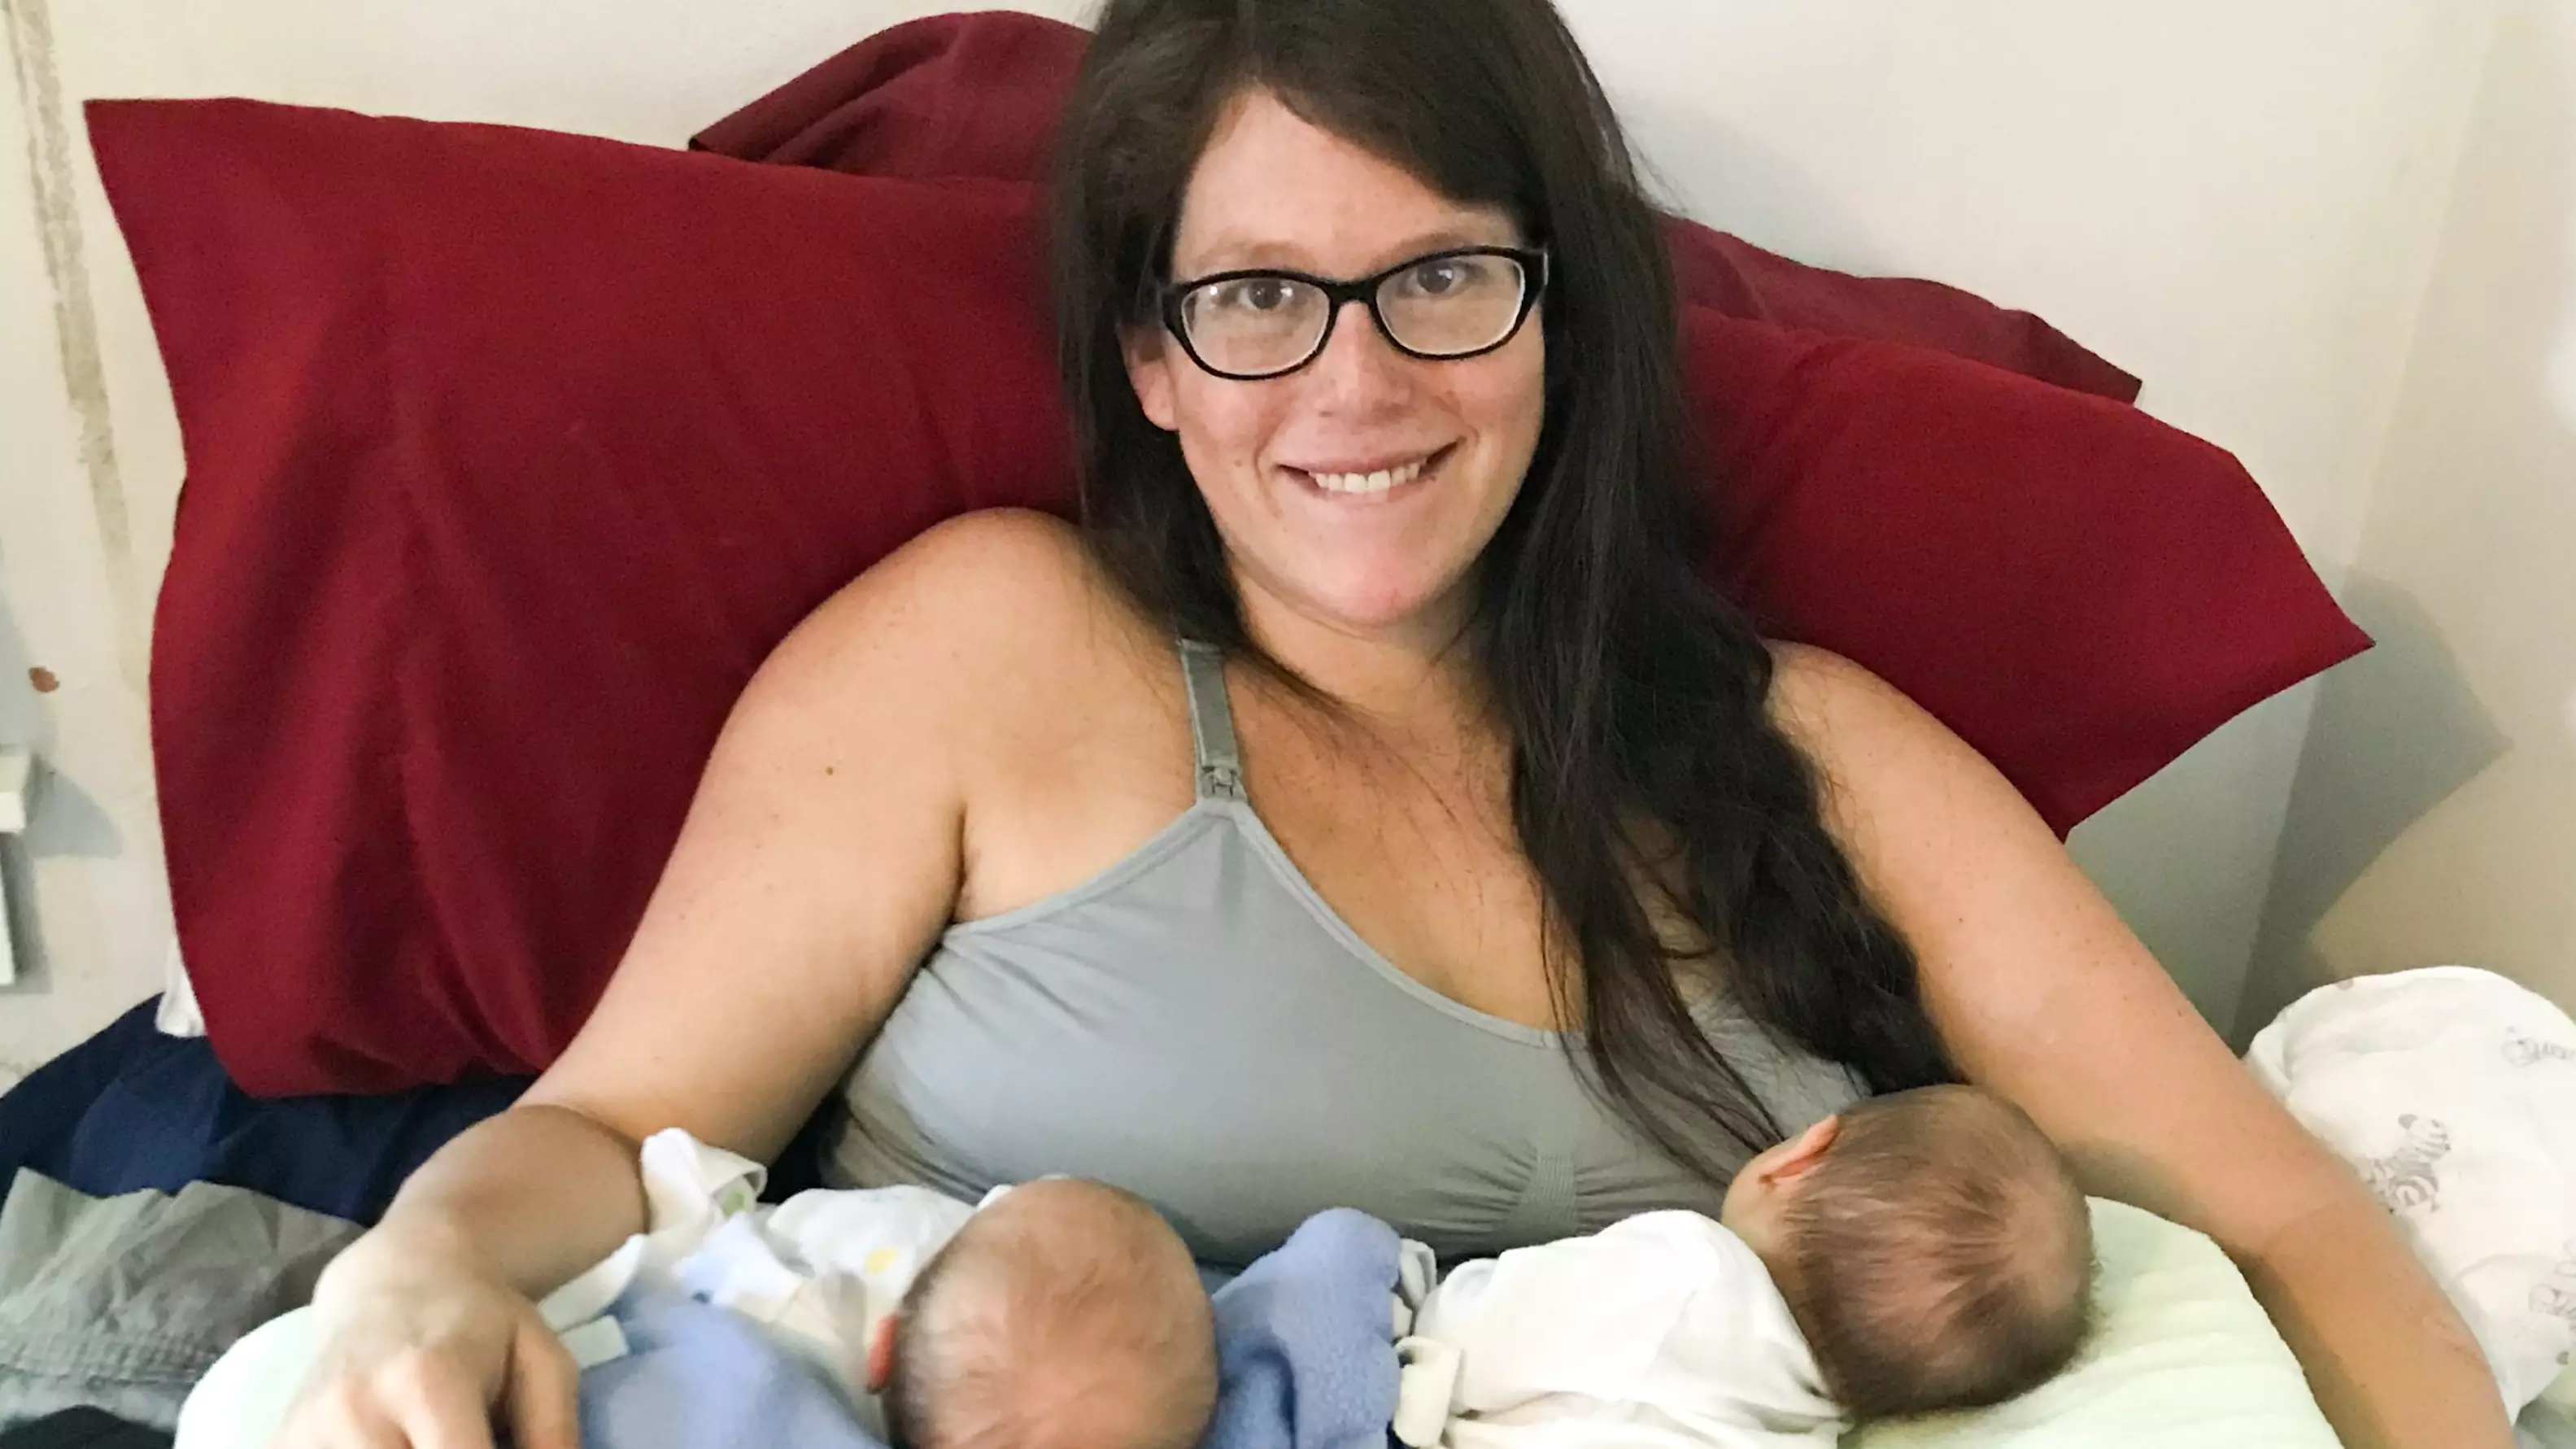 Woman Has Surprise Twin Moments After Giving Birth To Her Daughter